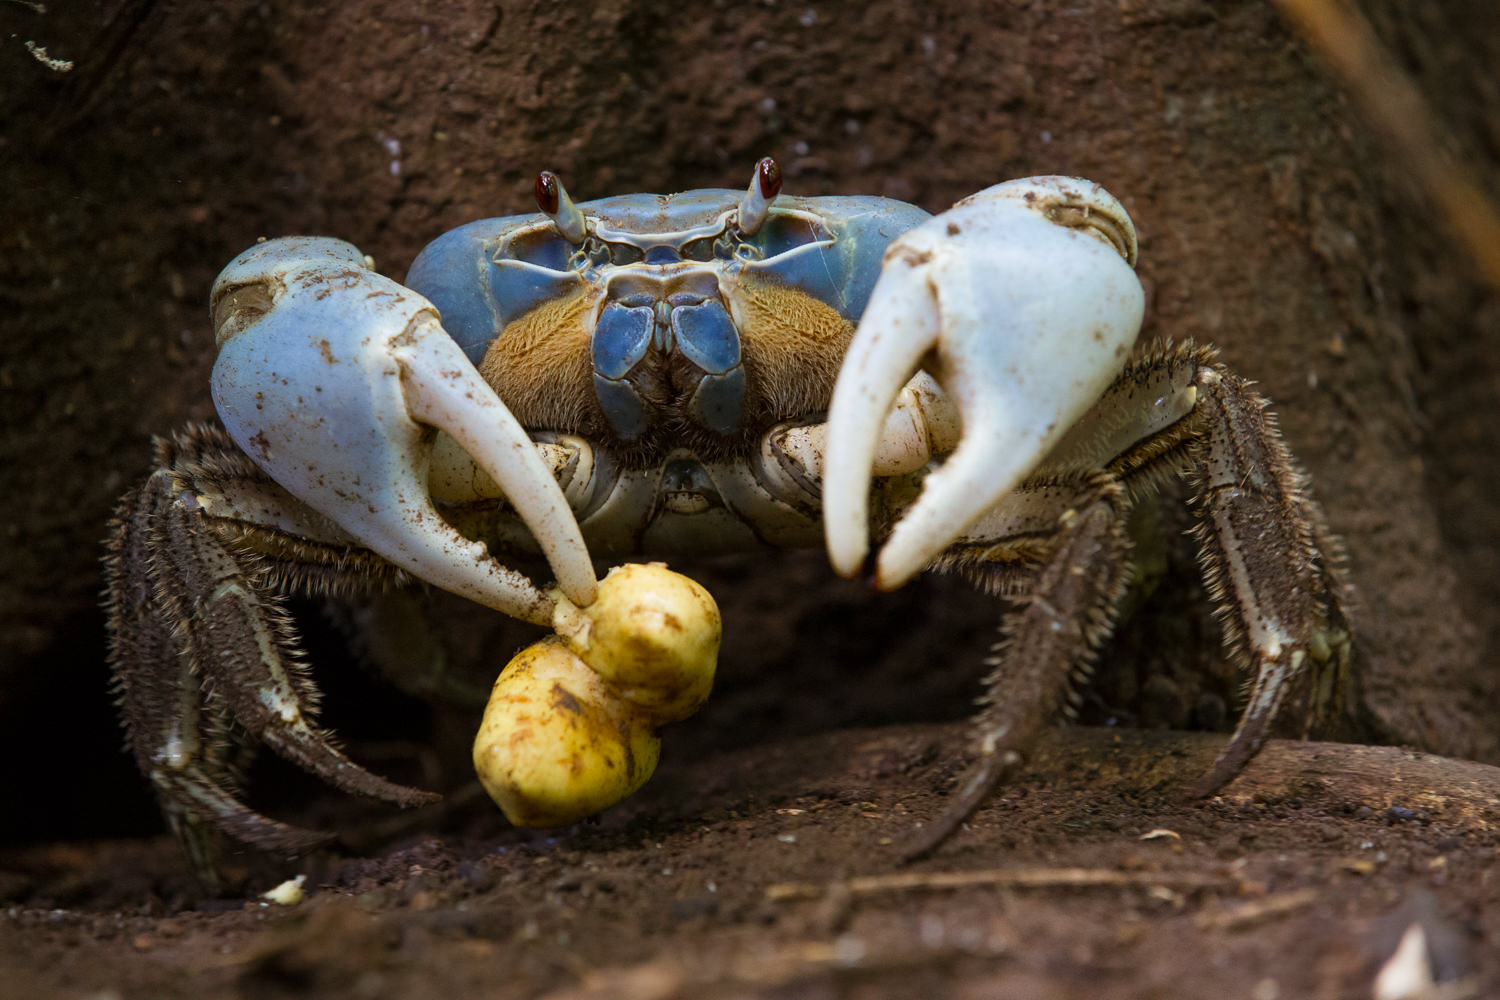 Blue Crabs tend to be more weary of visitors